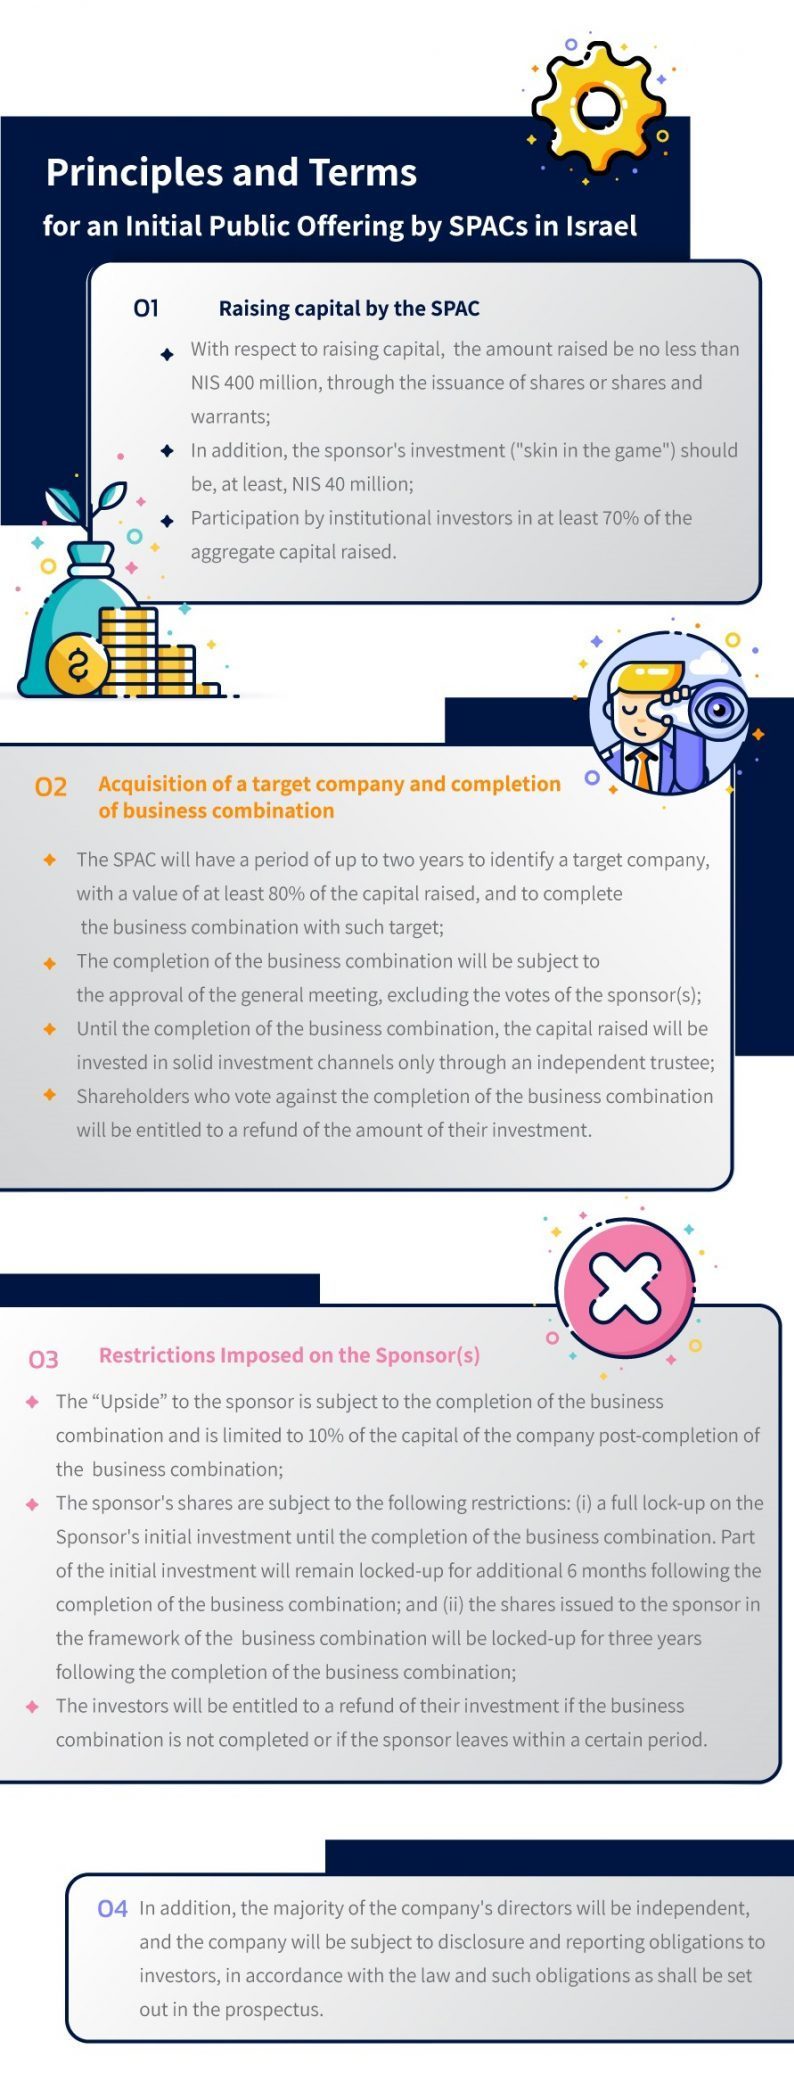 Principles and Terms for an Initial Public Offering by SPACs in Israel 1. Raising capital by the SPAC: a. With respect to raising capital, the amount raised be no less than NIS 400 million, through the issuance of shares or shares and warrants; b. In addition, the sponsor's investment ("skin in the game") should be, at least, NIS 40 million; c. Participation by institutional investors in at least 70% of the aggregate capital raised. 2. Acquisition of a target company and completion of business combination: a. The SPAC will have a period of up to two years to identify a target company, with a value of at least 80% of the capital raised, and to complete the business combination with such target; b. The completion of the business combination will be conditioned by the approval of the general meeting, excluding the votes of the sponsor(s); c. Until the completion of the business combination, the capital raised will be invested in solid investment channels only through an independent trustee; d. Shareholders who vote against the completion of the business combination will be entitled to a refund of the amount of their investment. 3. Restrictions Imposed on the Sponsor(s): a. The “Upside” to the sponsor is conditioned by the completion of the business combination and is limited to 10% of the capital of the company post-completion of the business combination; b. The sponsor's shares are subject to the following restrictions: (i) a full lock-up on the Sponsor's initial investment until the completion of the business combination. Part of the initial investment will remain locked-up for additional 6 months following the completion of the business combination; and (ii) the shares issued to the sponsor in the framework of the business combination will be locked-up for three years following the completion of the business combination; c. The investors will be entitled to a refund of their investment if the business combination is not completed or if the sponsor leaves within a certain period. 4. In addition, the majority of the company's directors will be independent, and the company will be subject to disclosure and reporting obligations to investors, in accordance with the law and such obligations as shall be set out in the prospectus.